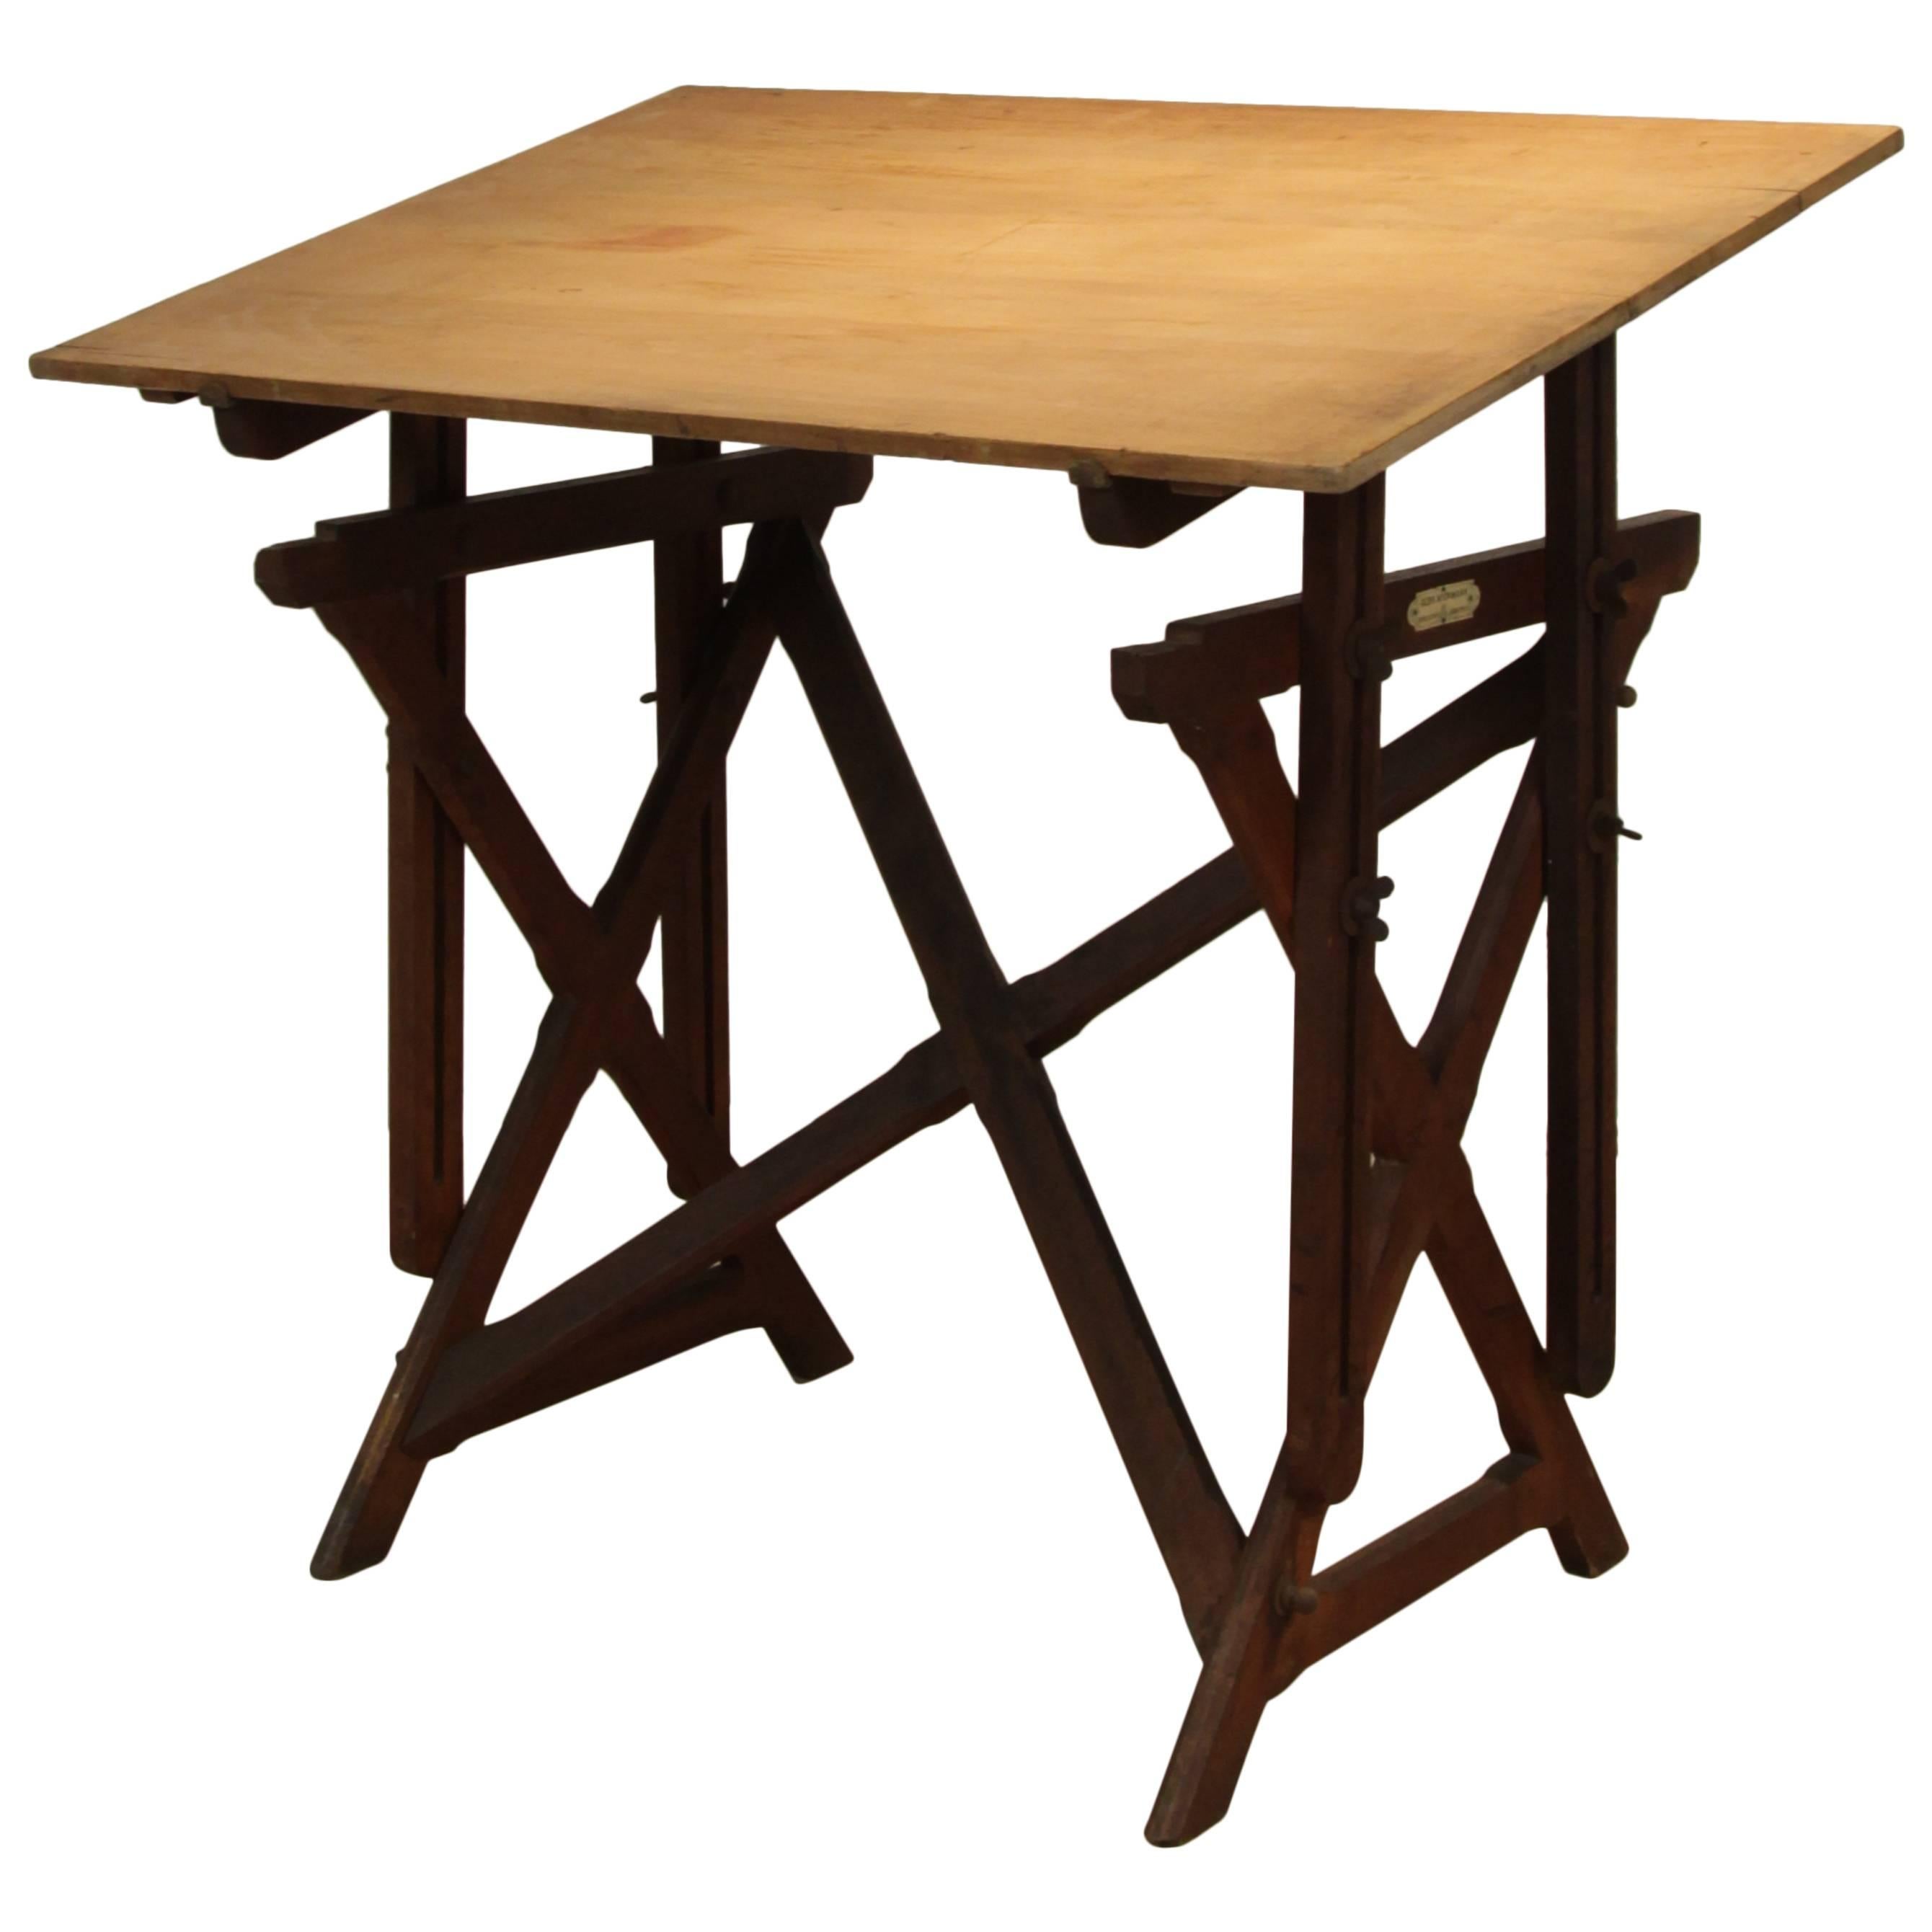 Architects Table, 1930